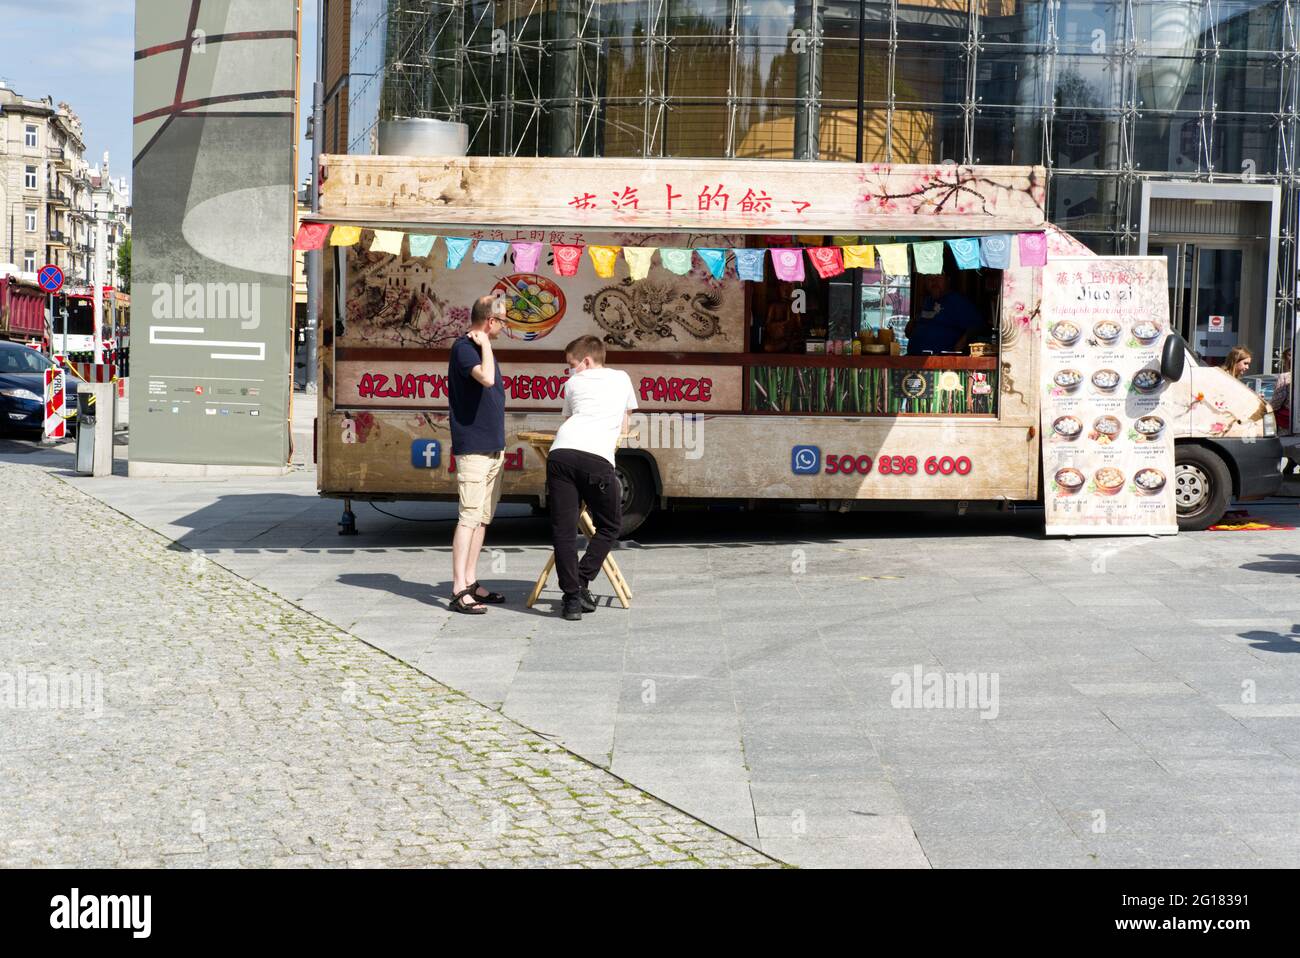 Lublin, Poland June 04 2021 food truck in city square during street food festival after reopening bars and cafes after pandemic lockdown Stock Photo